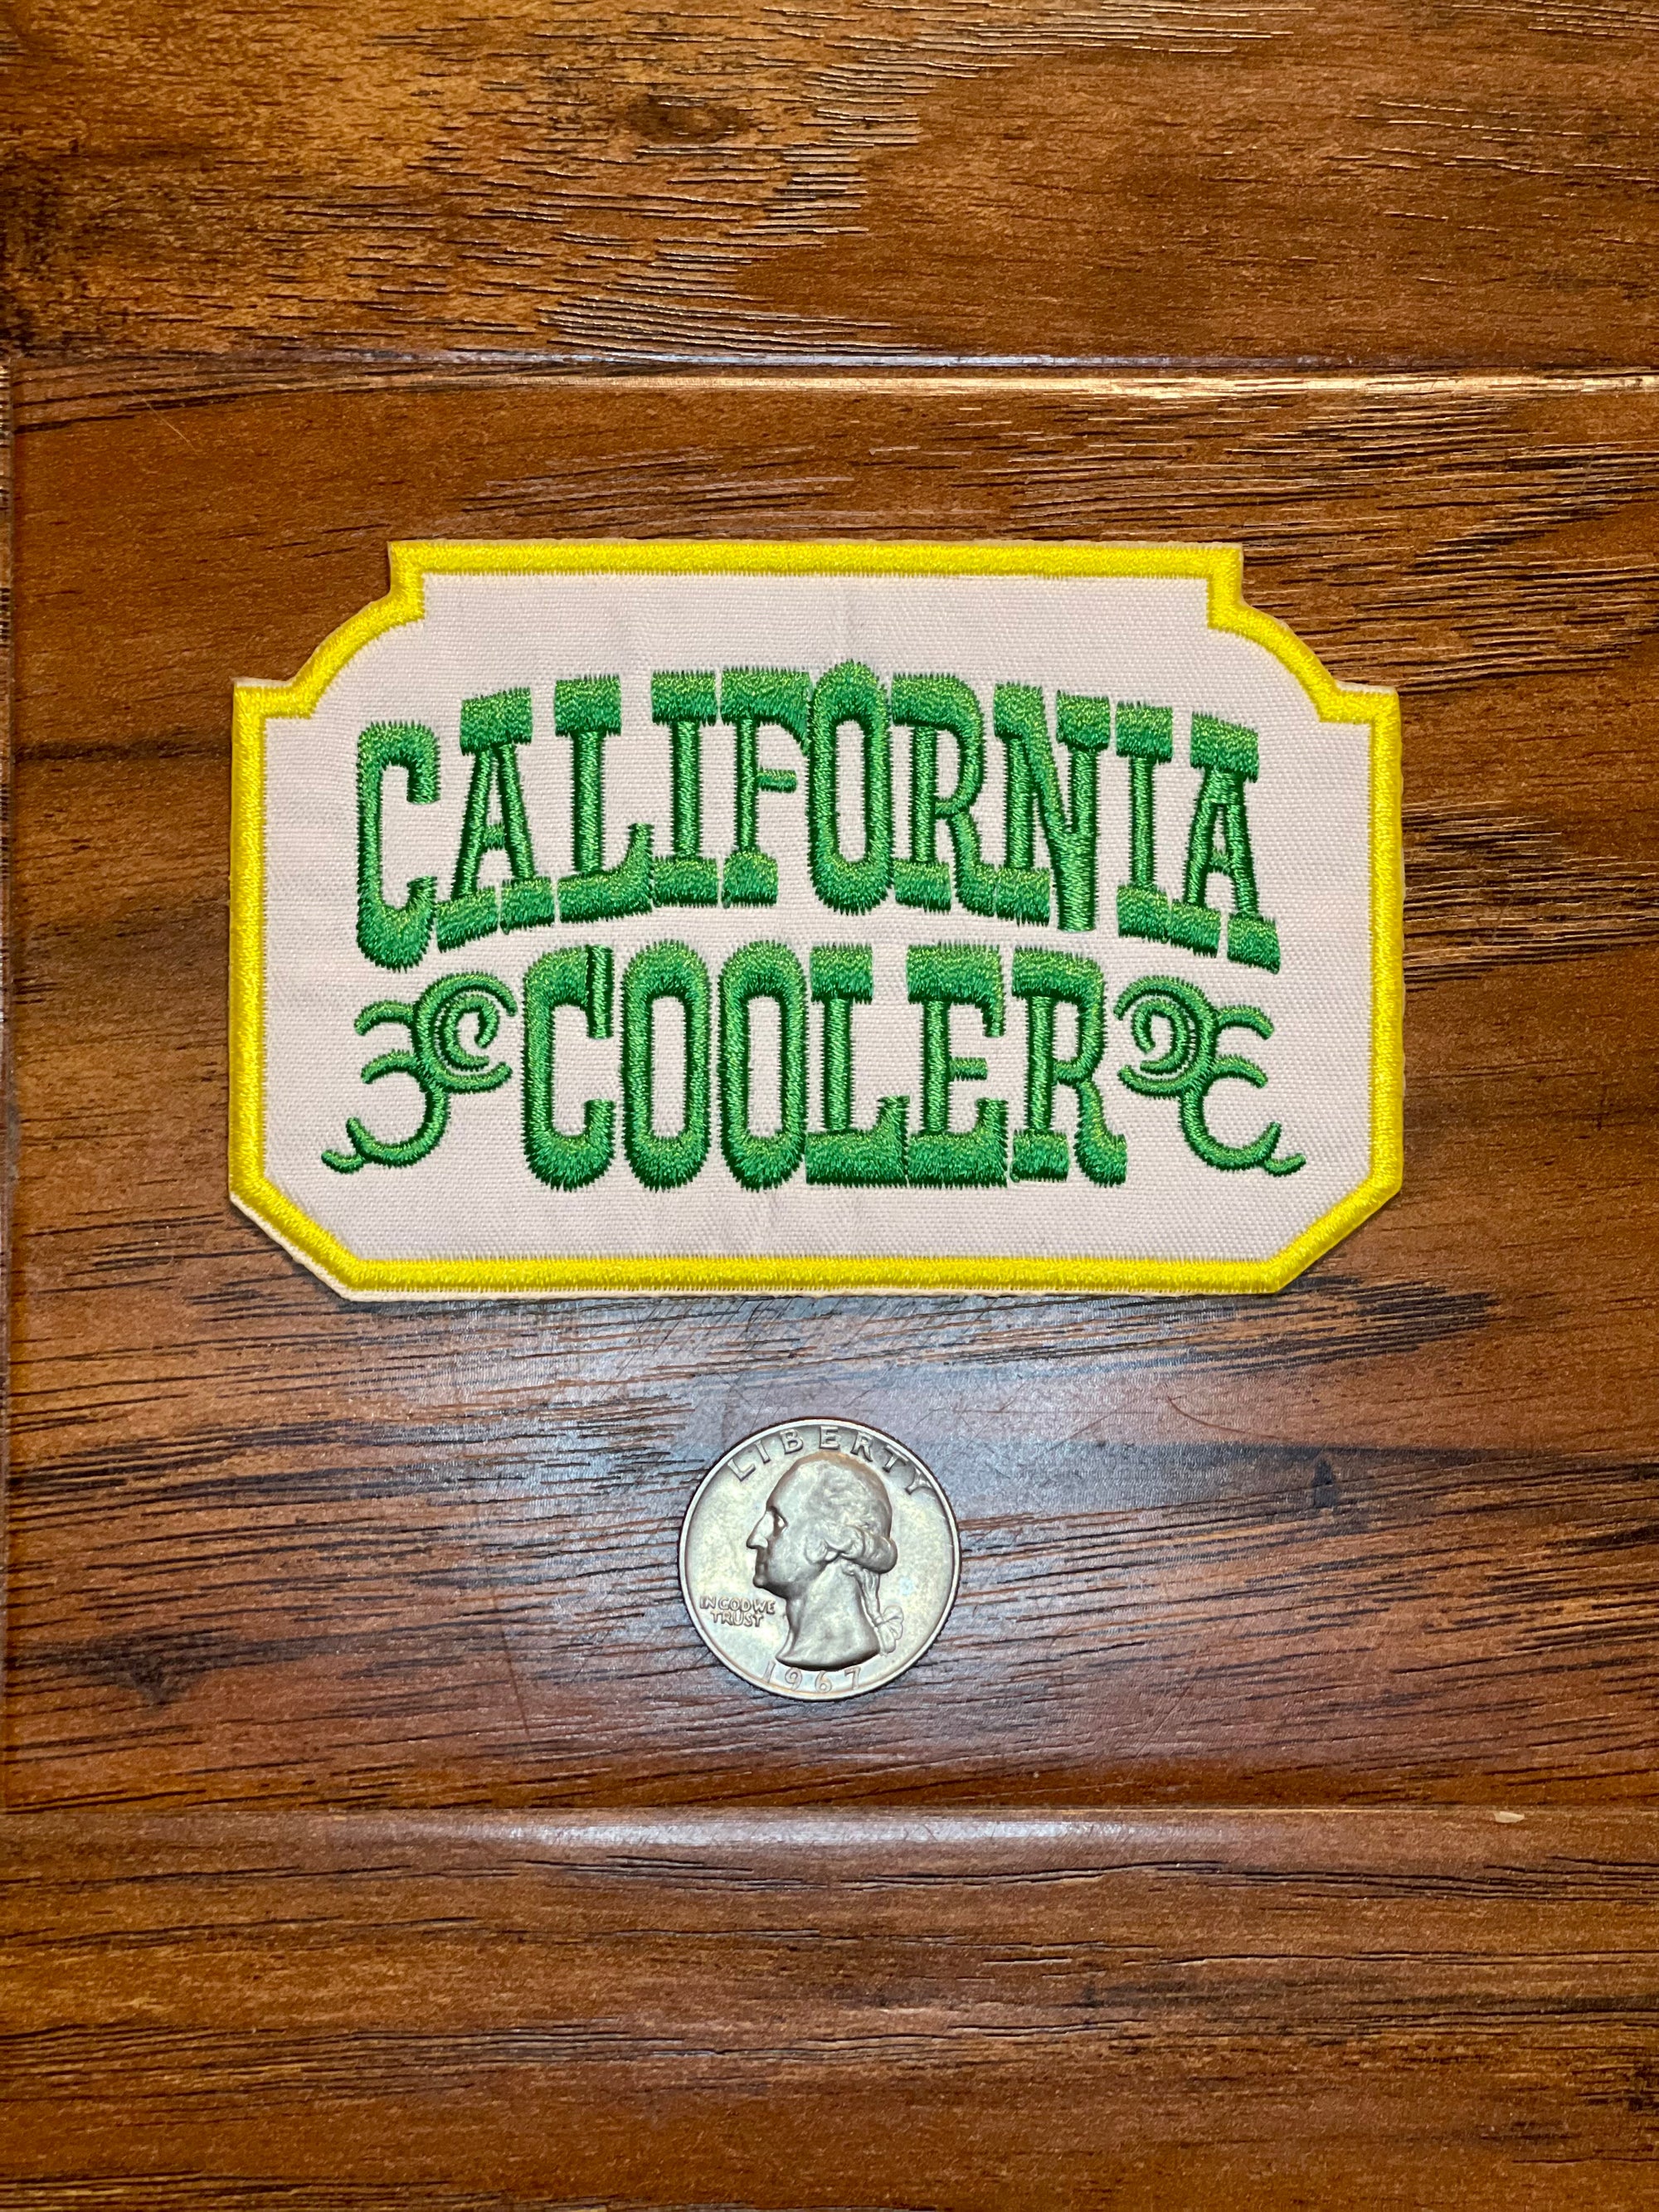 California Cooler, Alcohol, Drinks, Beer